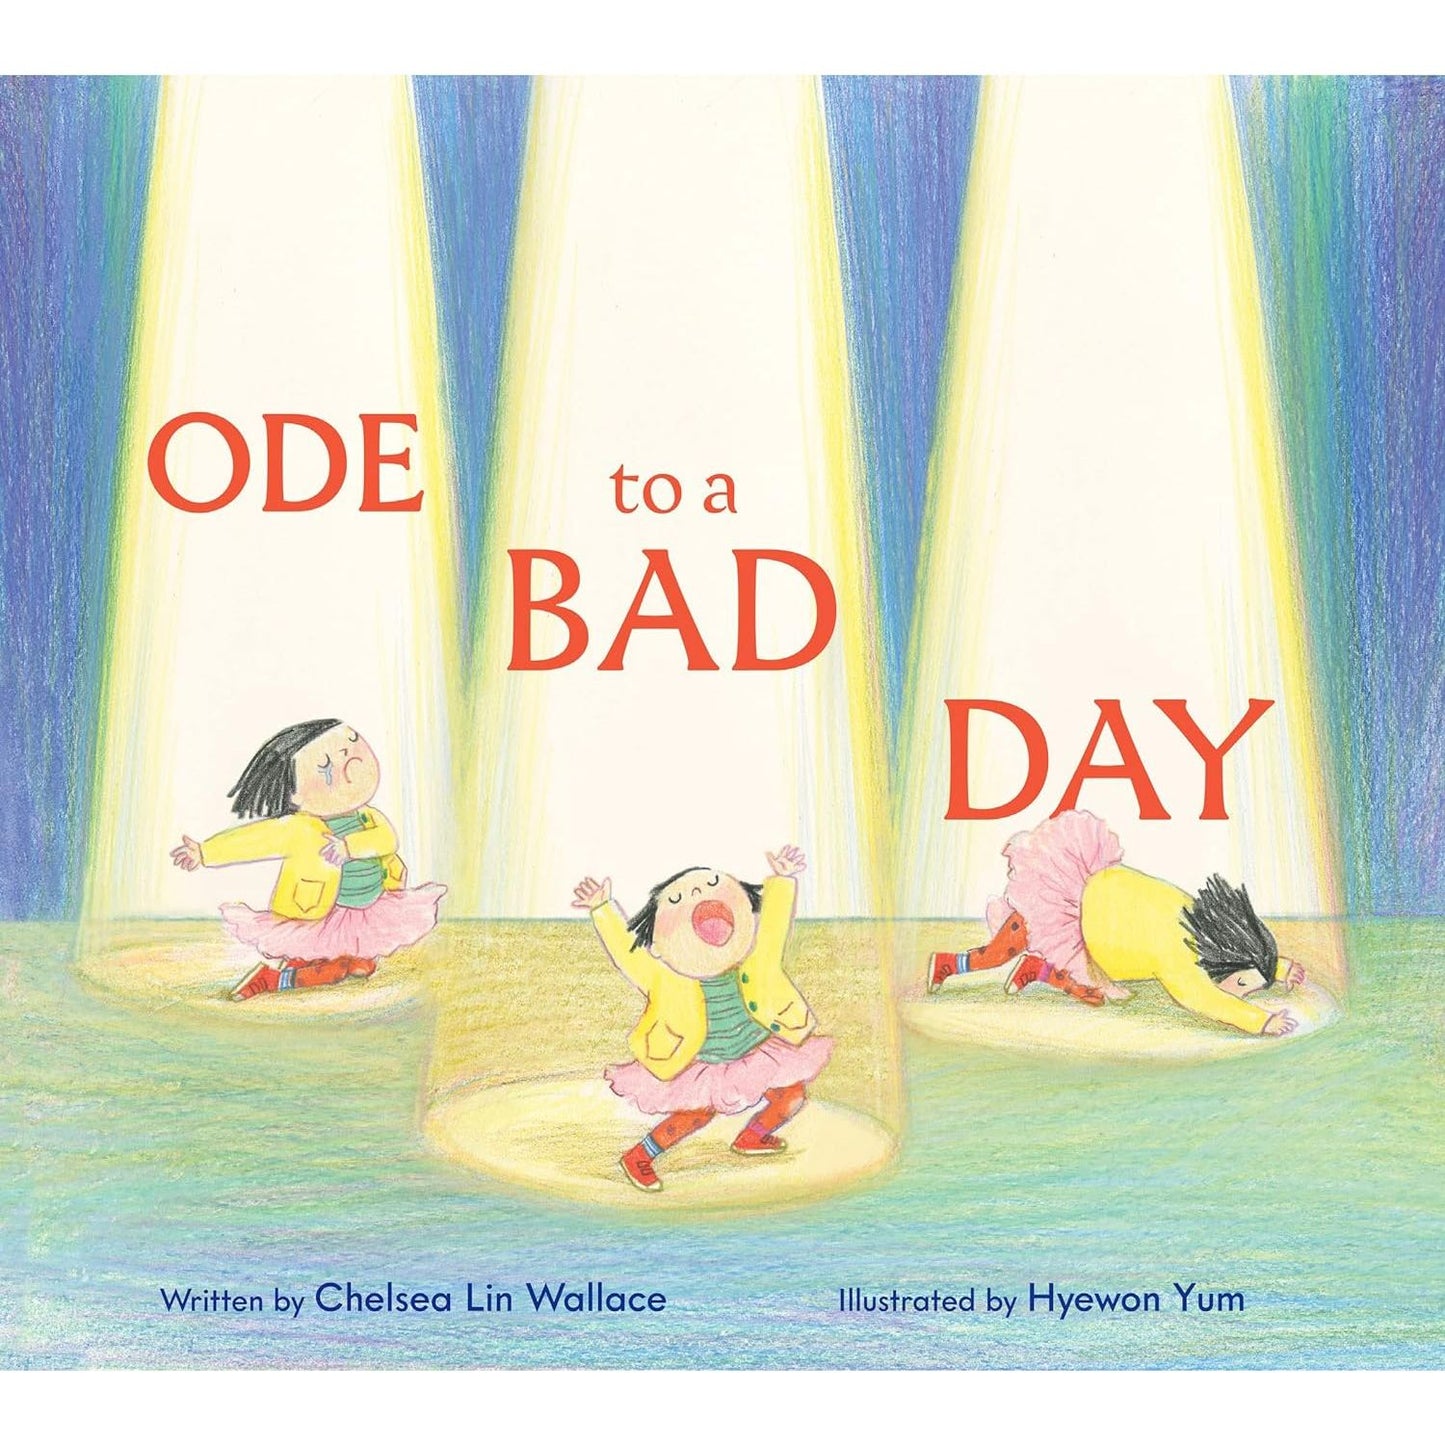 Ode to a Bad Day - Hardcover Picture Book